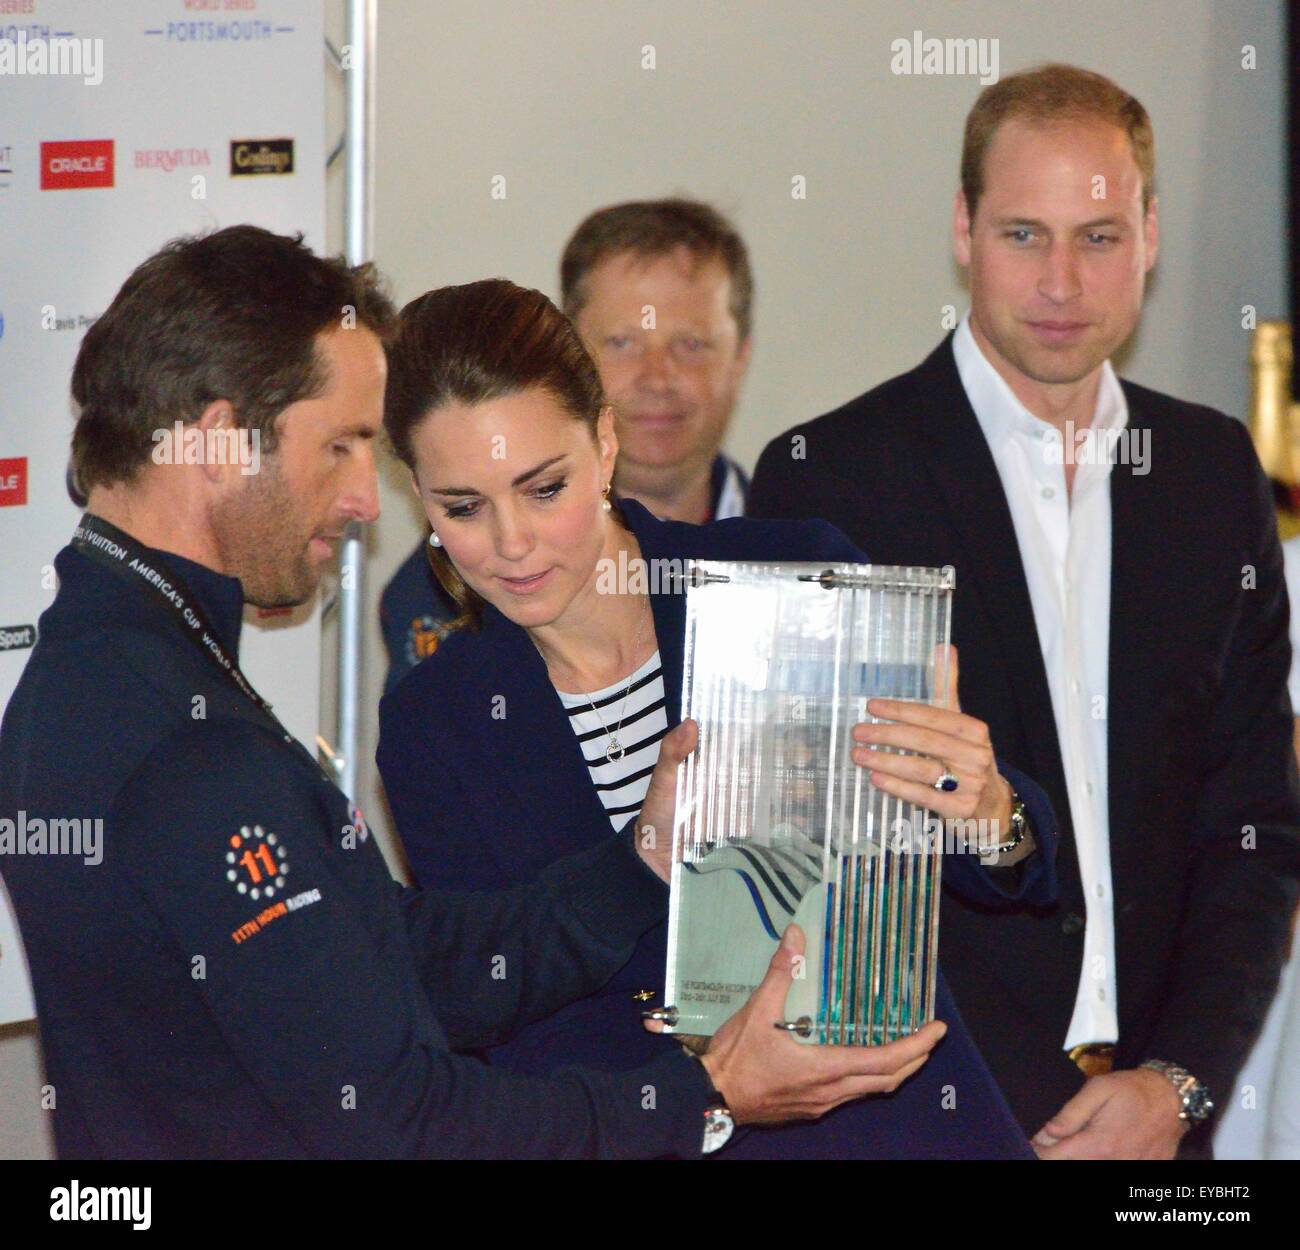 Portsmouth, Hampshire, UK. 26th July, 2015. The Duke and Duchess of Cambridge present Sir Ben Ainslie, skipper of the British 'Land Rover BAR' team with the cup for winning the  Louis Vuitton America's Cup World Cup Series Portsmouth at the official prize giving.  The cup was designed by 5 year old Leo Howard from a local school on behalf of the 1851 Trust and made by artist Michelle Littlewood. Credit:  Wendy Johnson/Alamy Live News (photographer media accredited for this event) Stock Photo